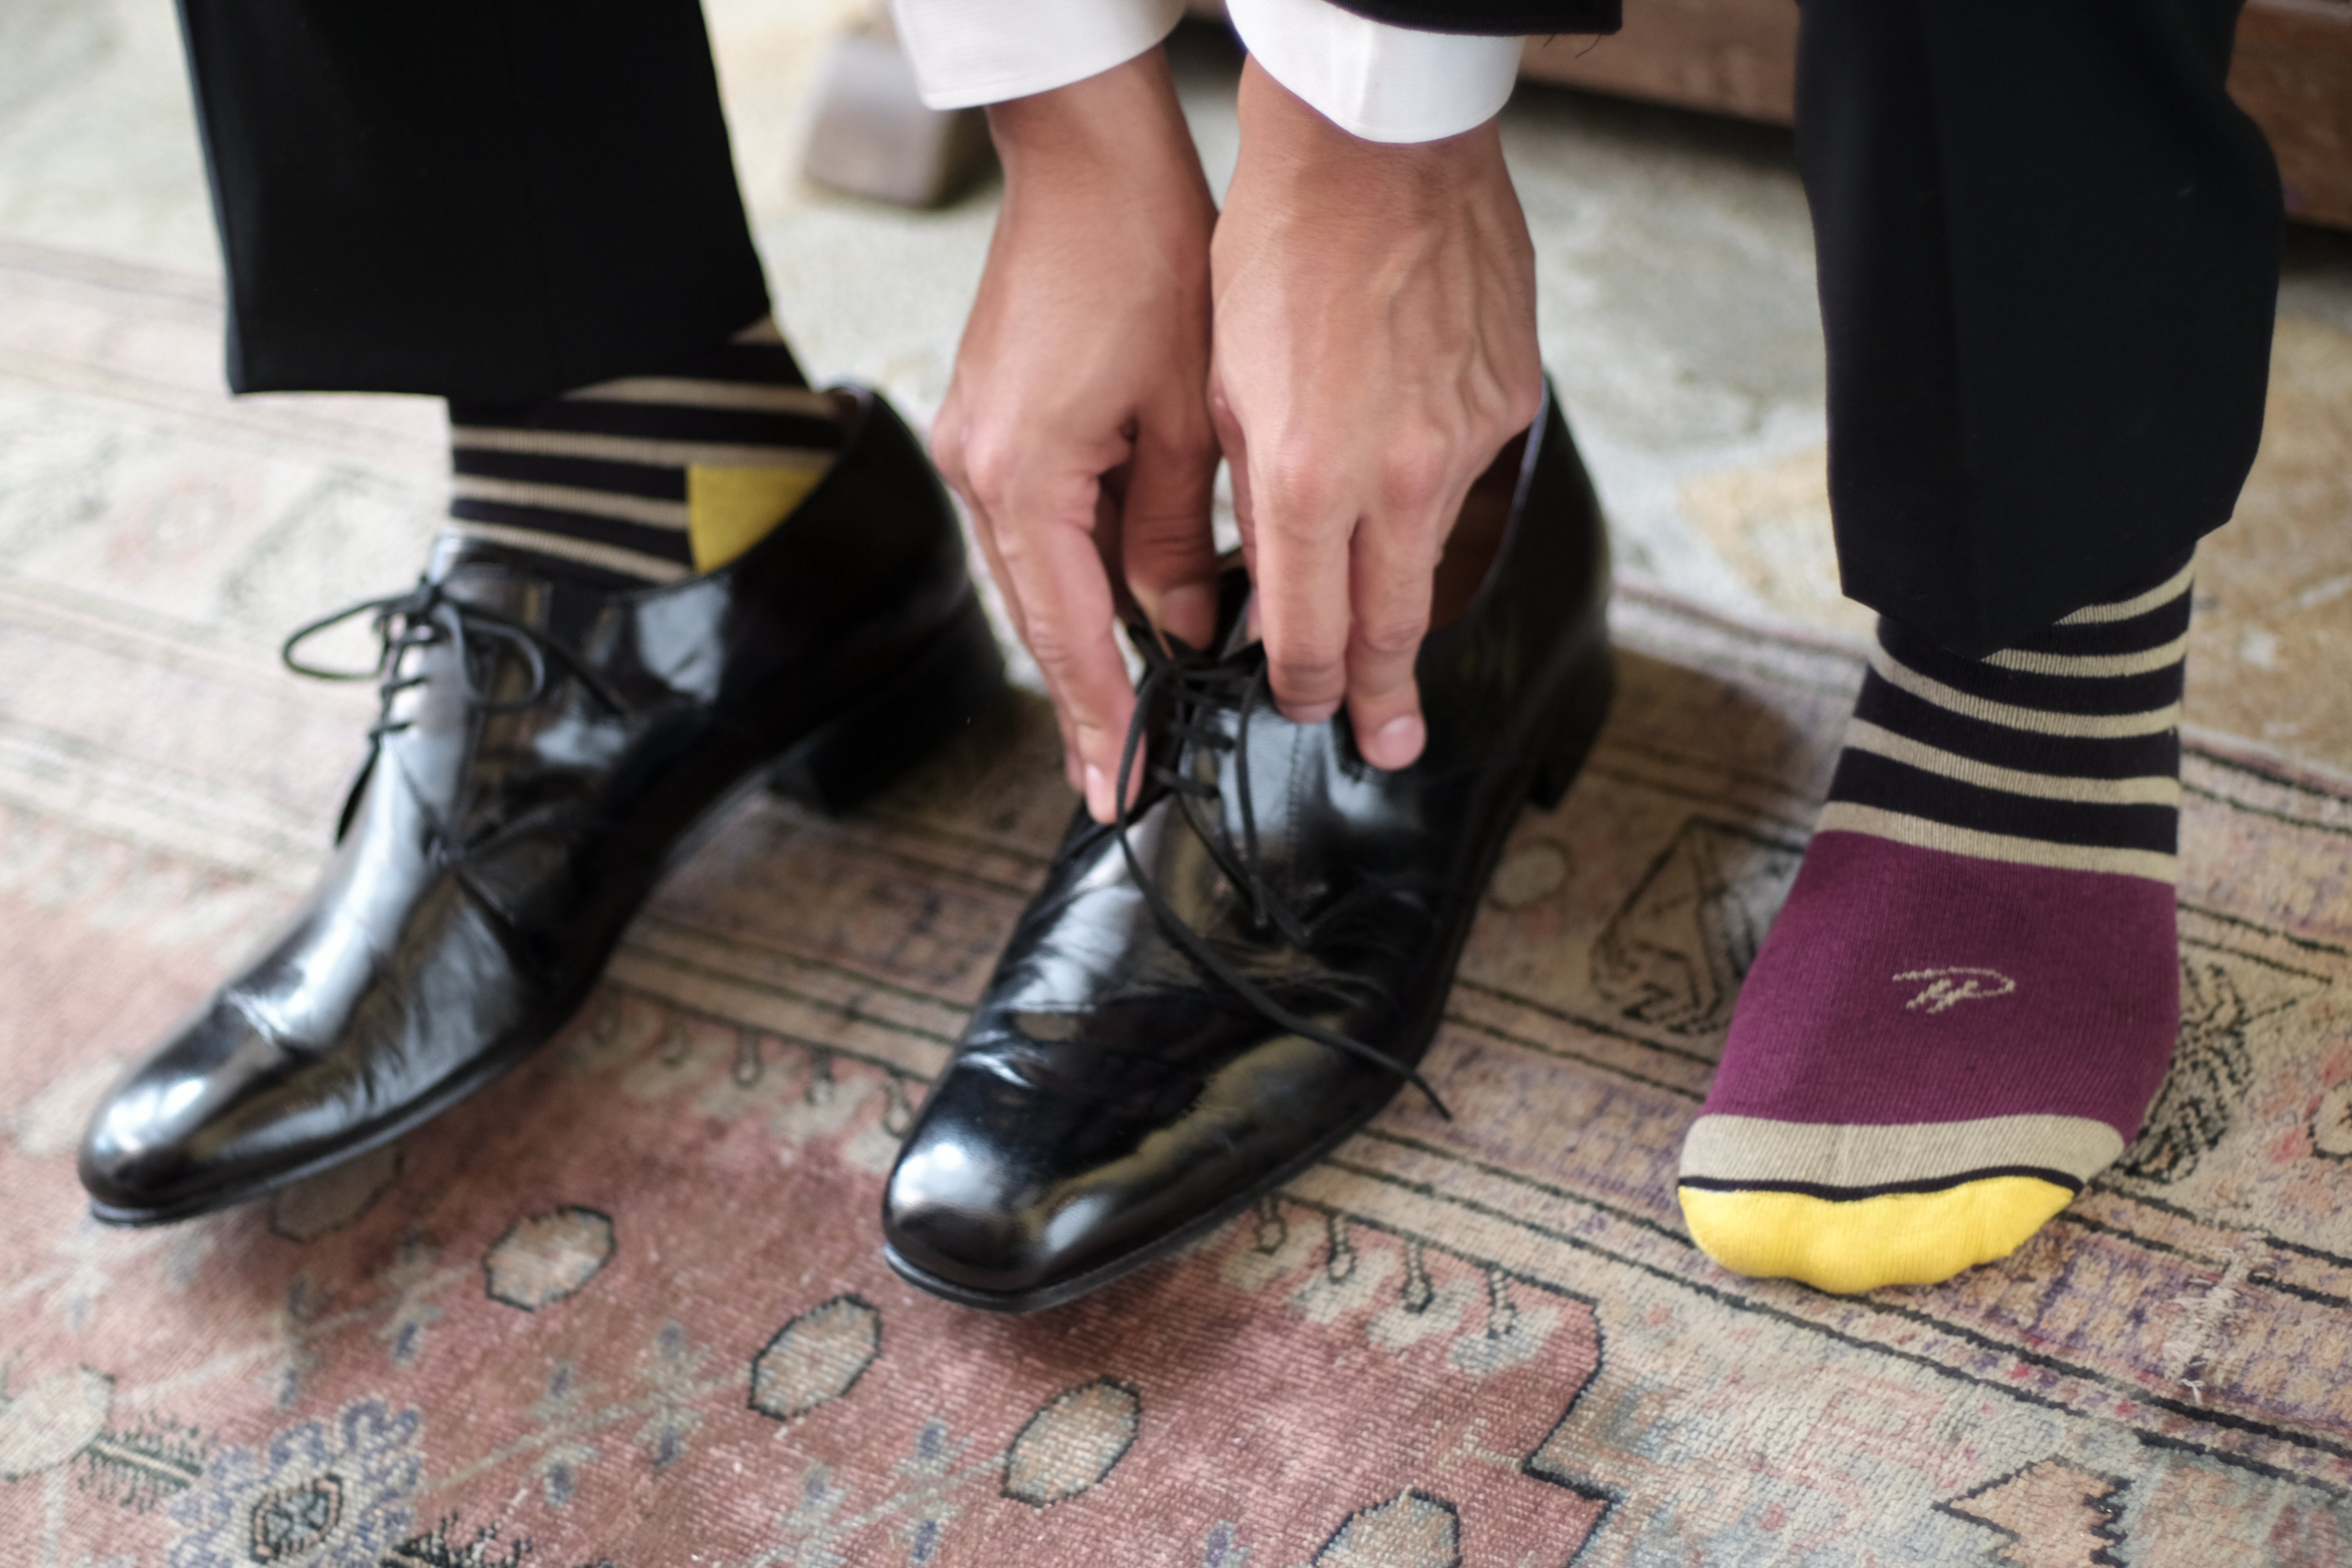 beige and black striped over the calf dress socks with plum foot and yellow toe, black dress shoes, black dress pants